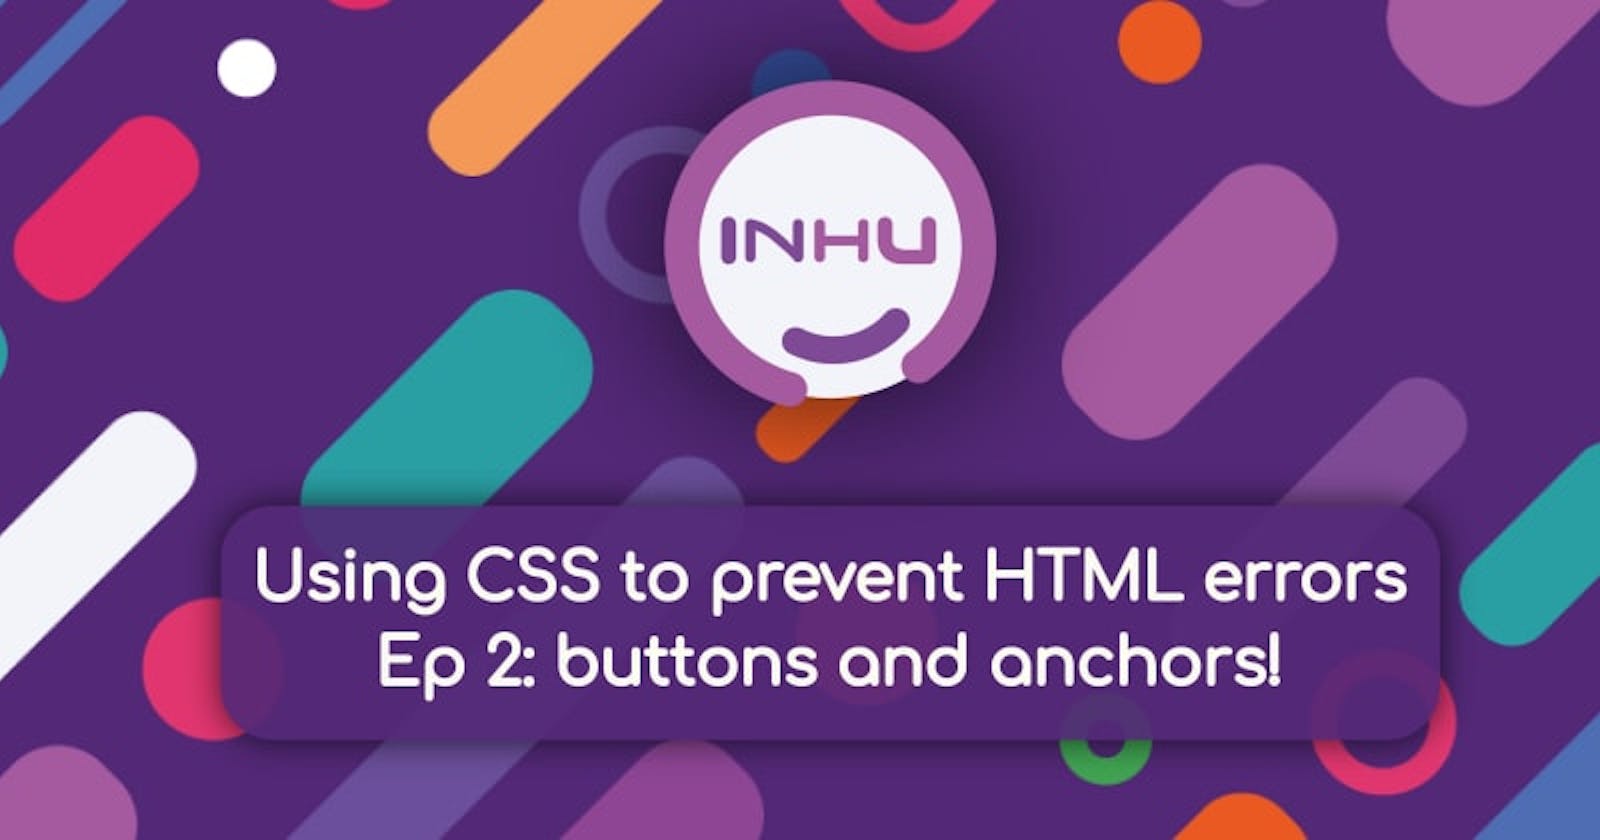 CSS can help improve your HTML⁉ - Ep 2: buttons and links.